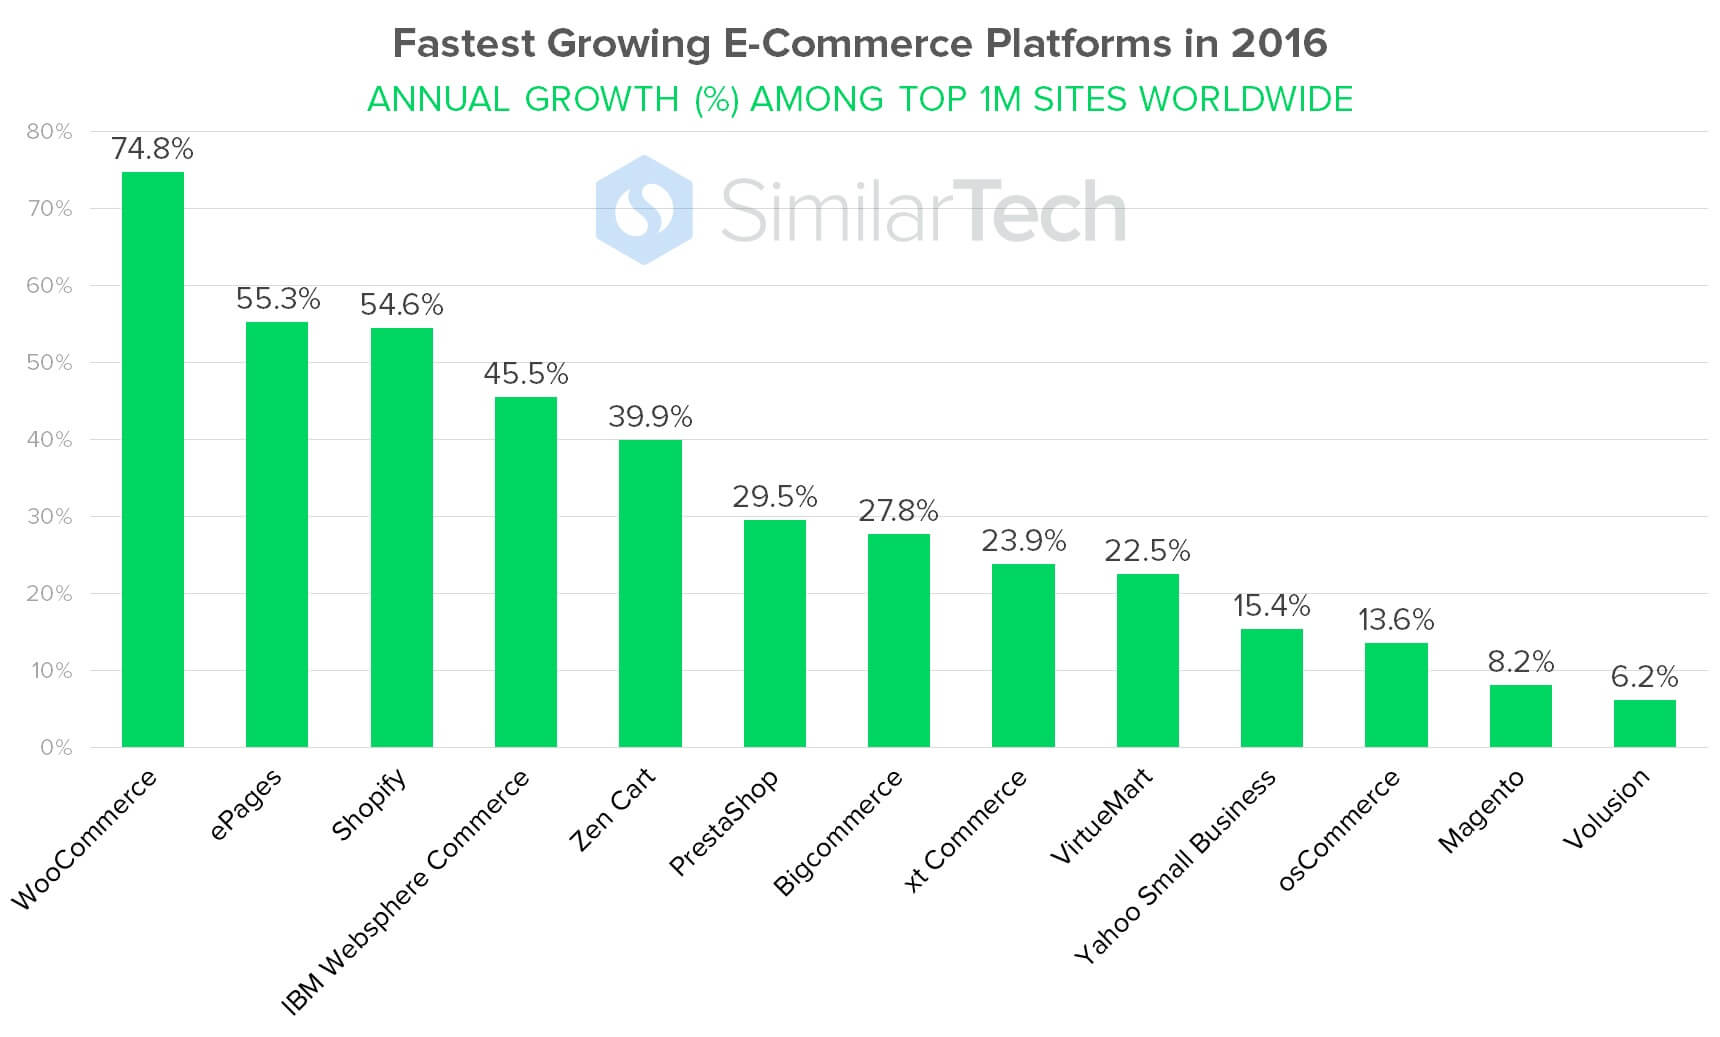 Fastest growing e-commerce platforms in 2016